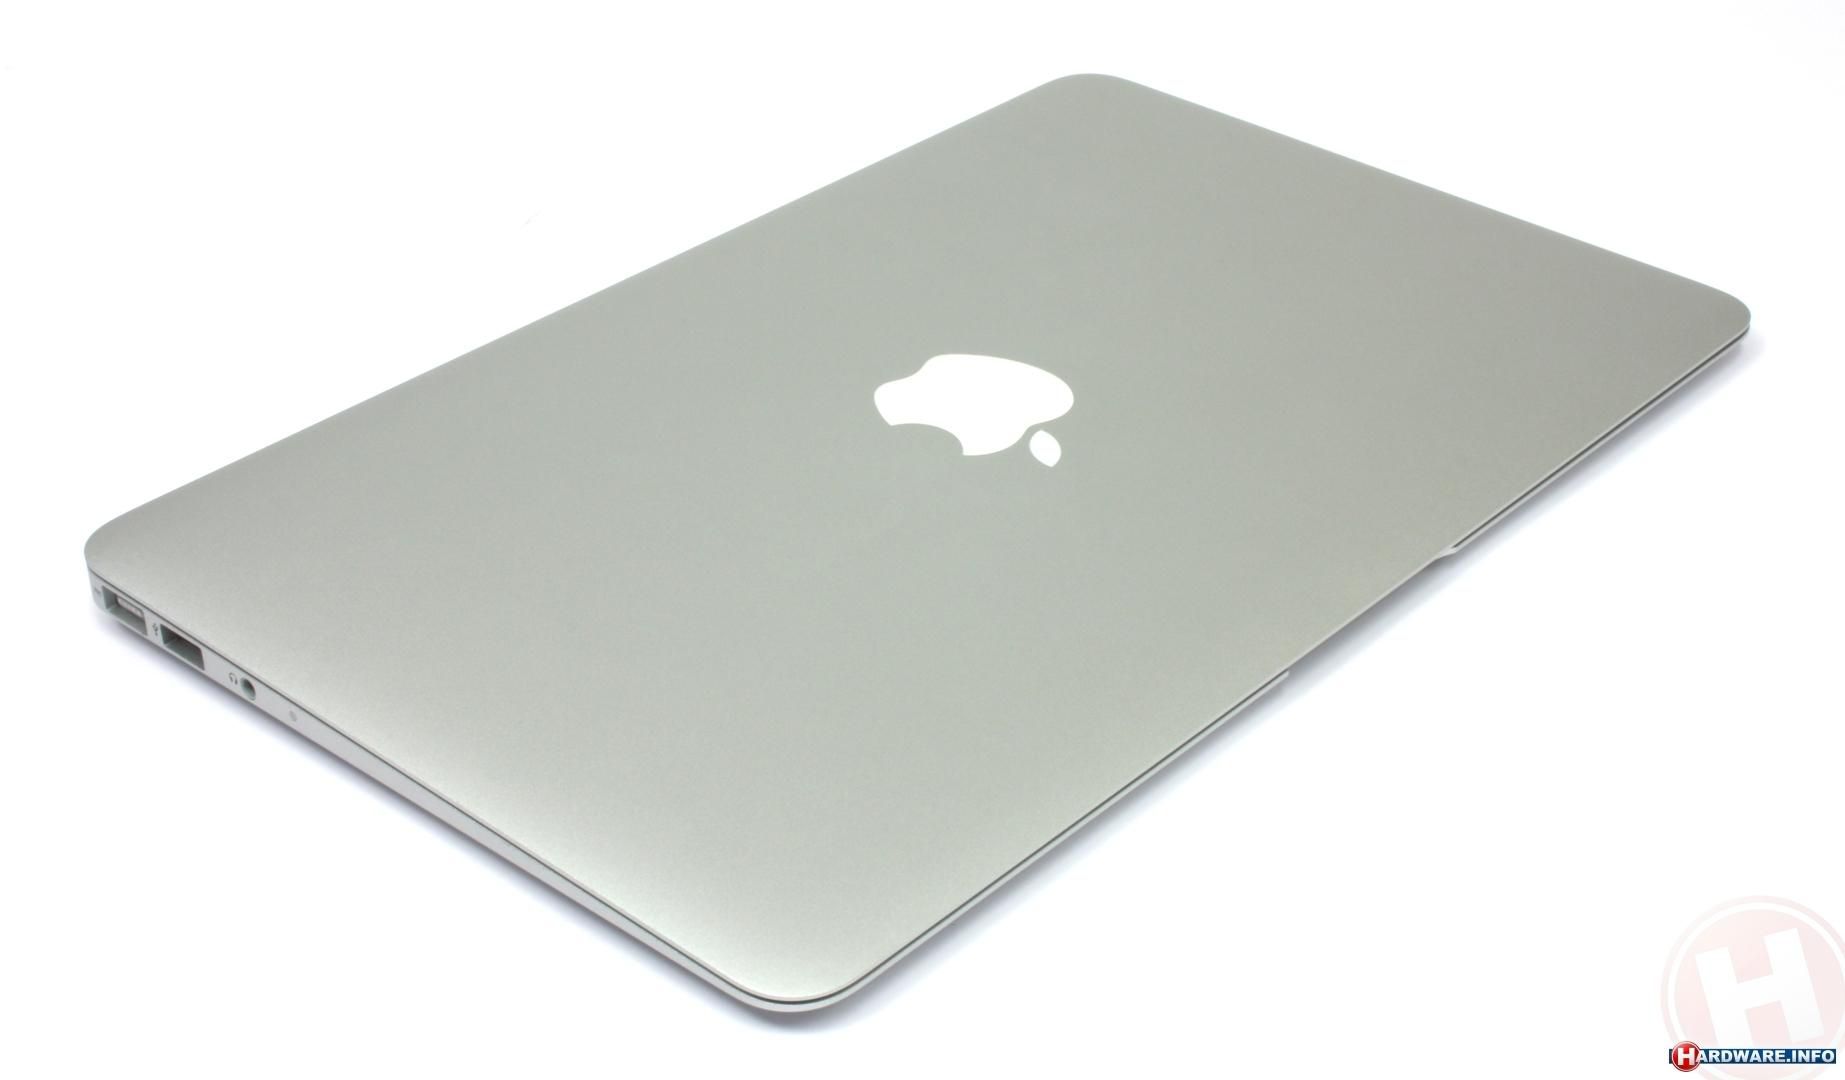 Apple macbook air a1370 price iphone charge